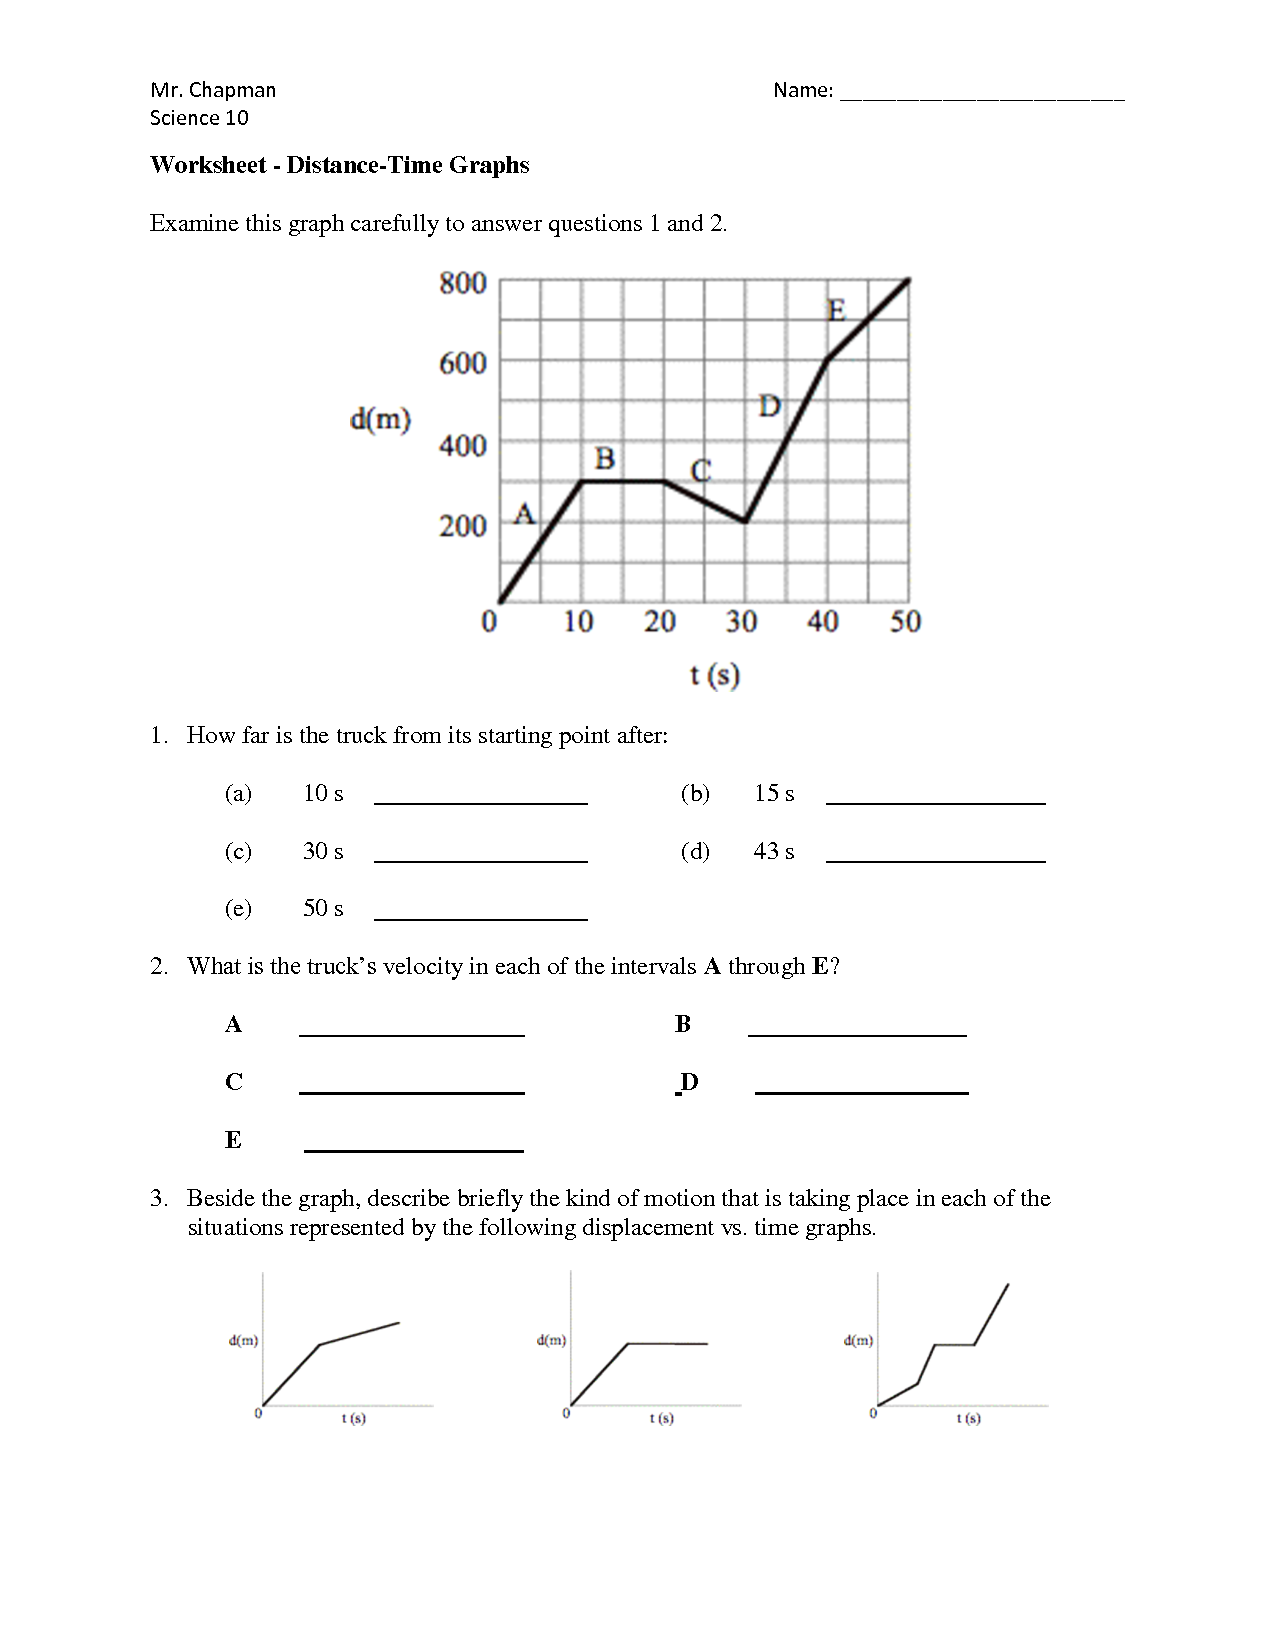 distance-time-graph-worksheet-free-download-goodimg-co